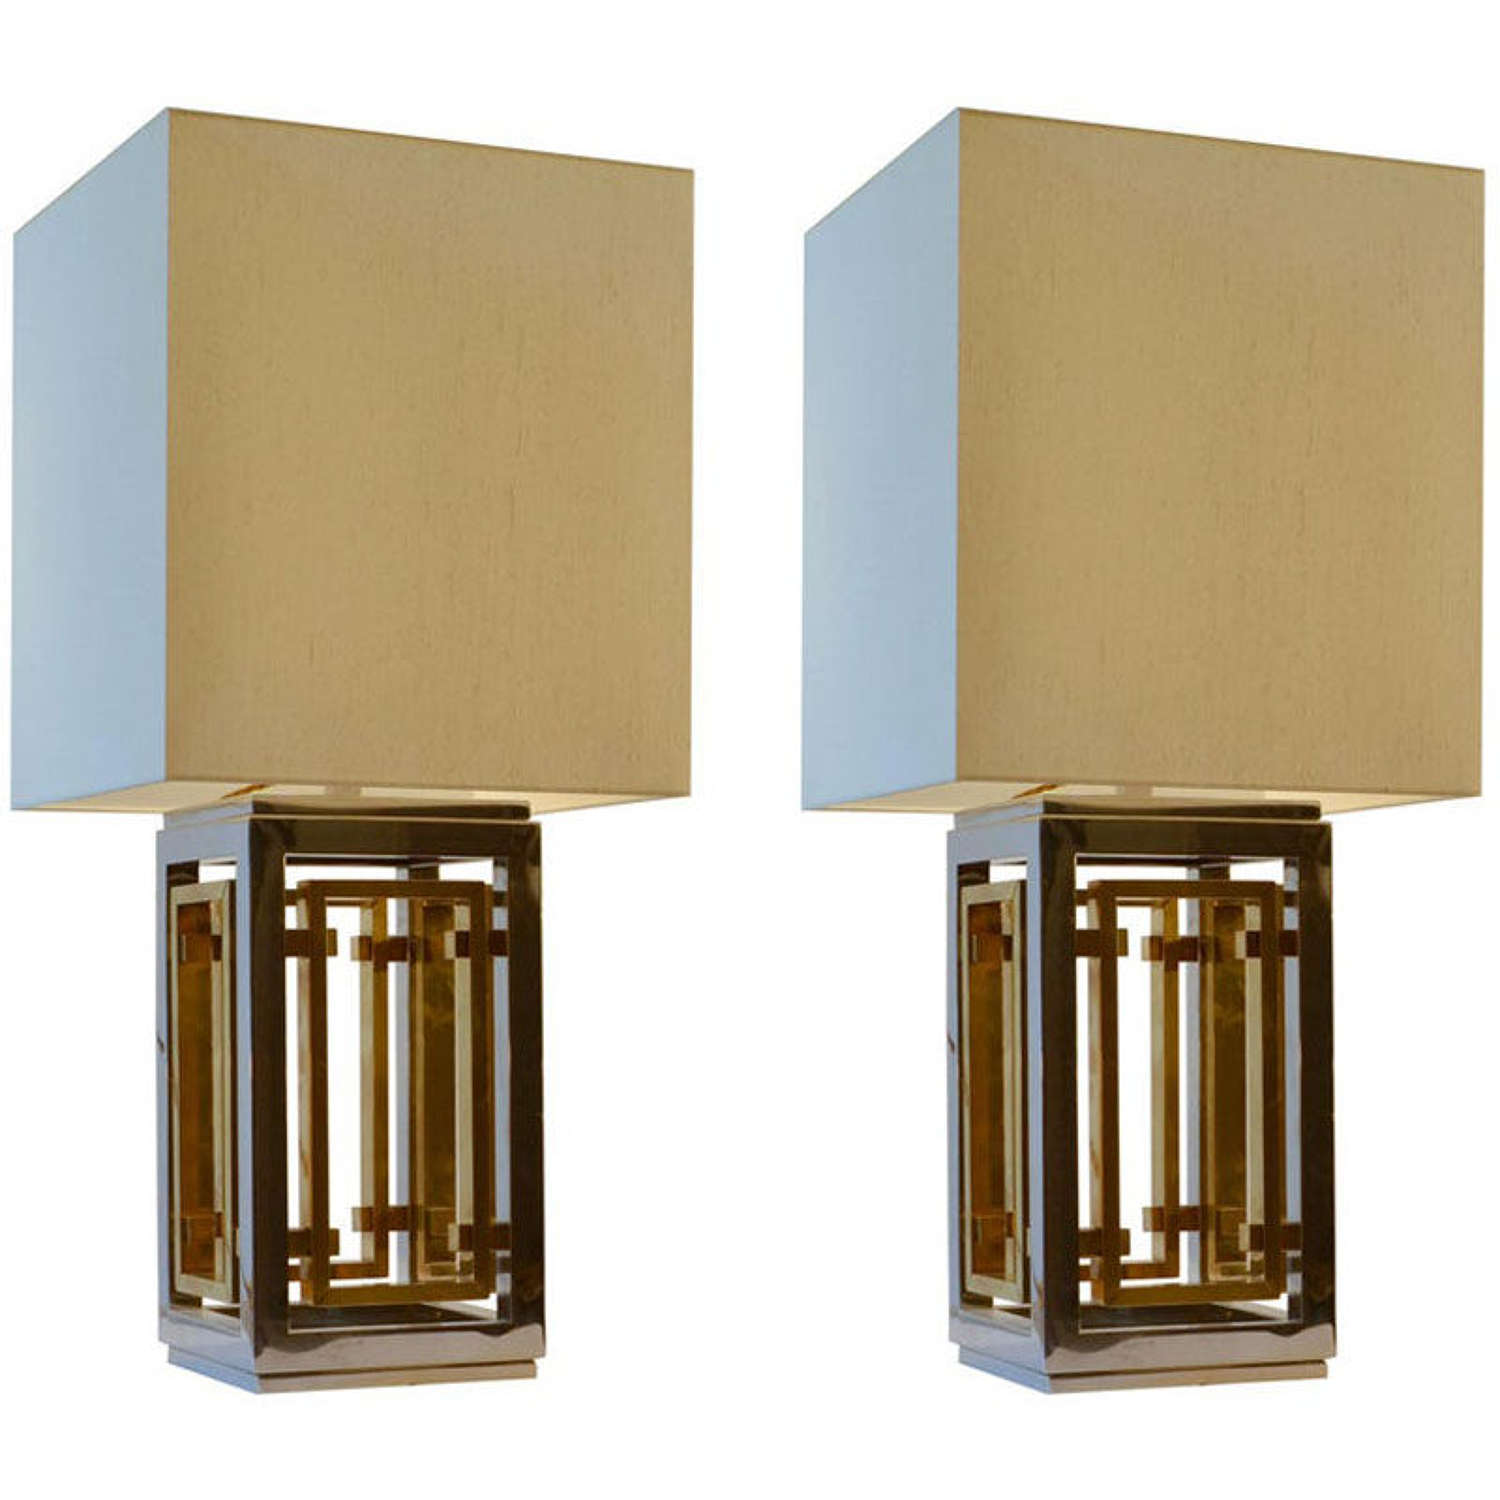 Romeo Rega Pair of Table Lamps, Chrome and Brass